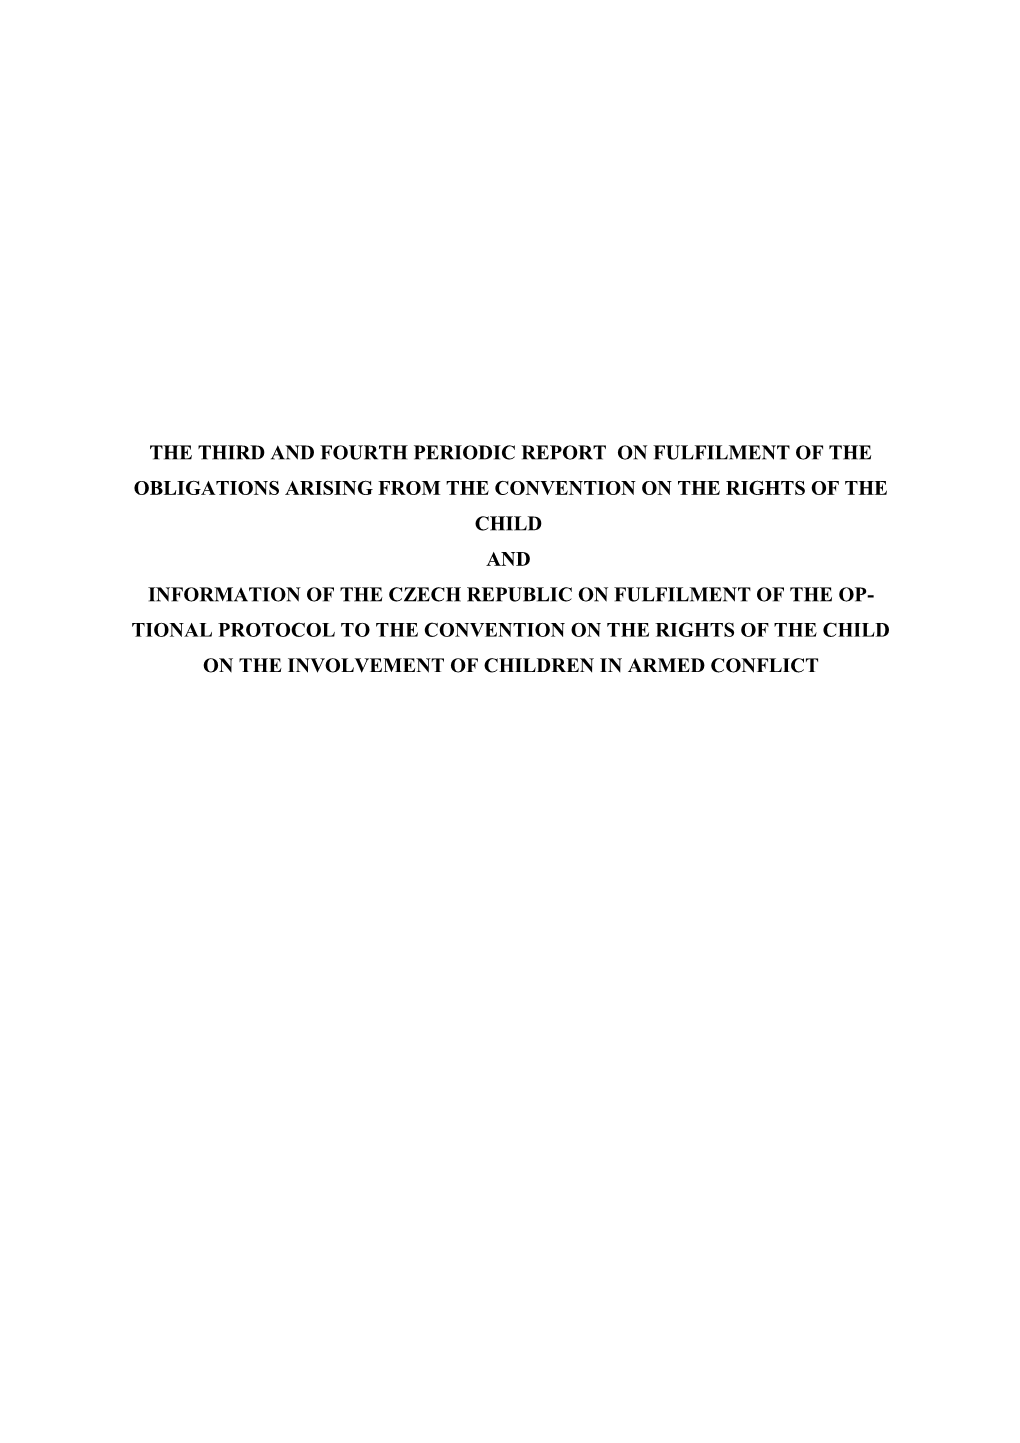 The Third and Fourth Periodic Report on FULFILMENT of the OBLIGATIONS ARISING from THE